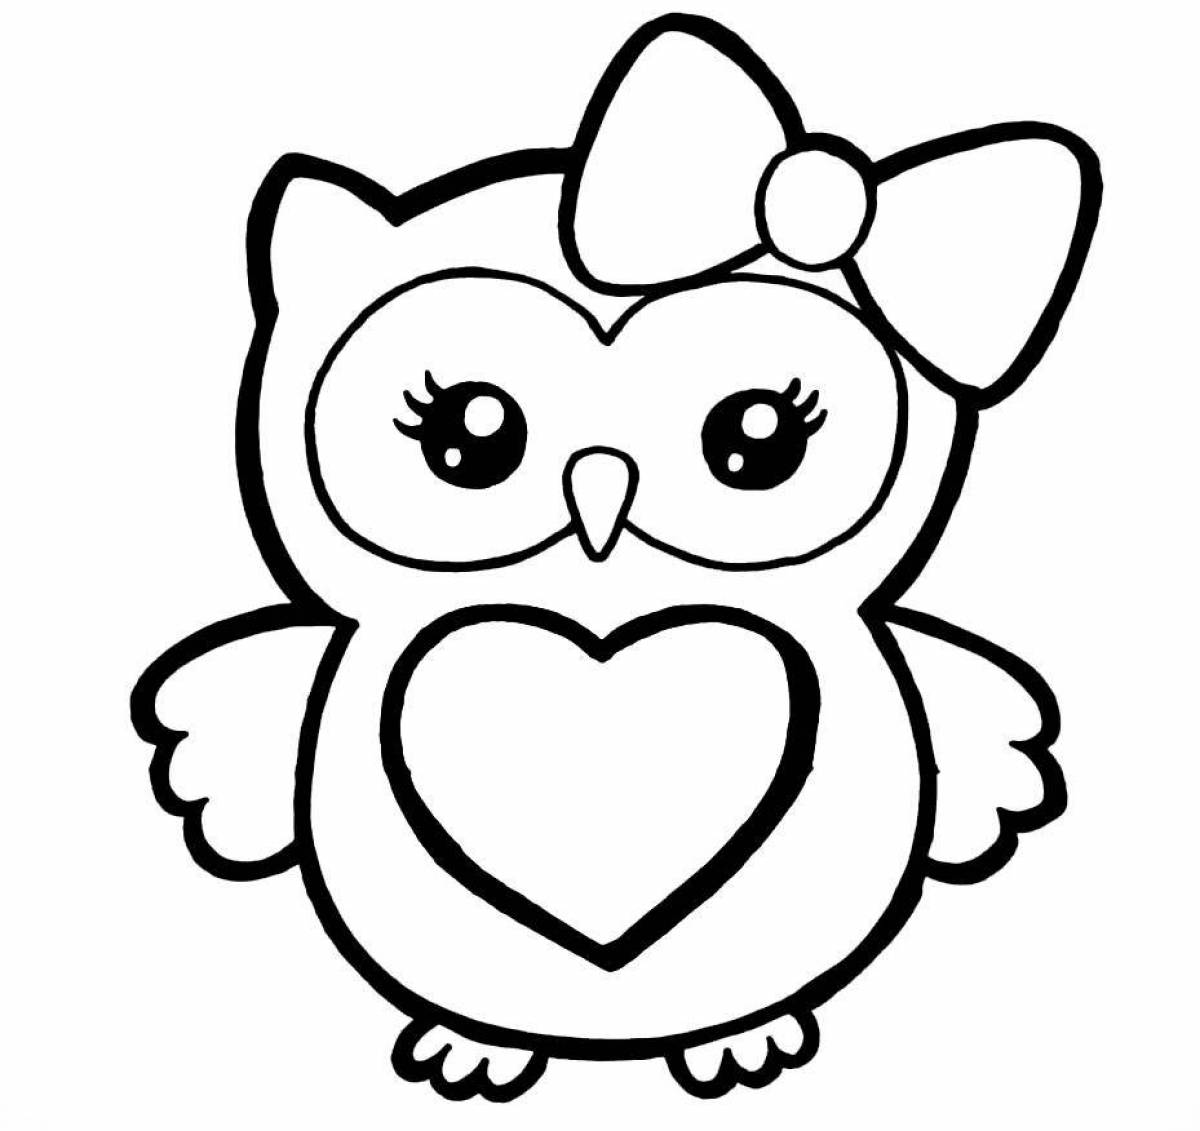 Coloring soft owlet